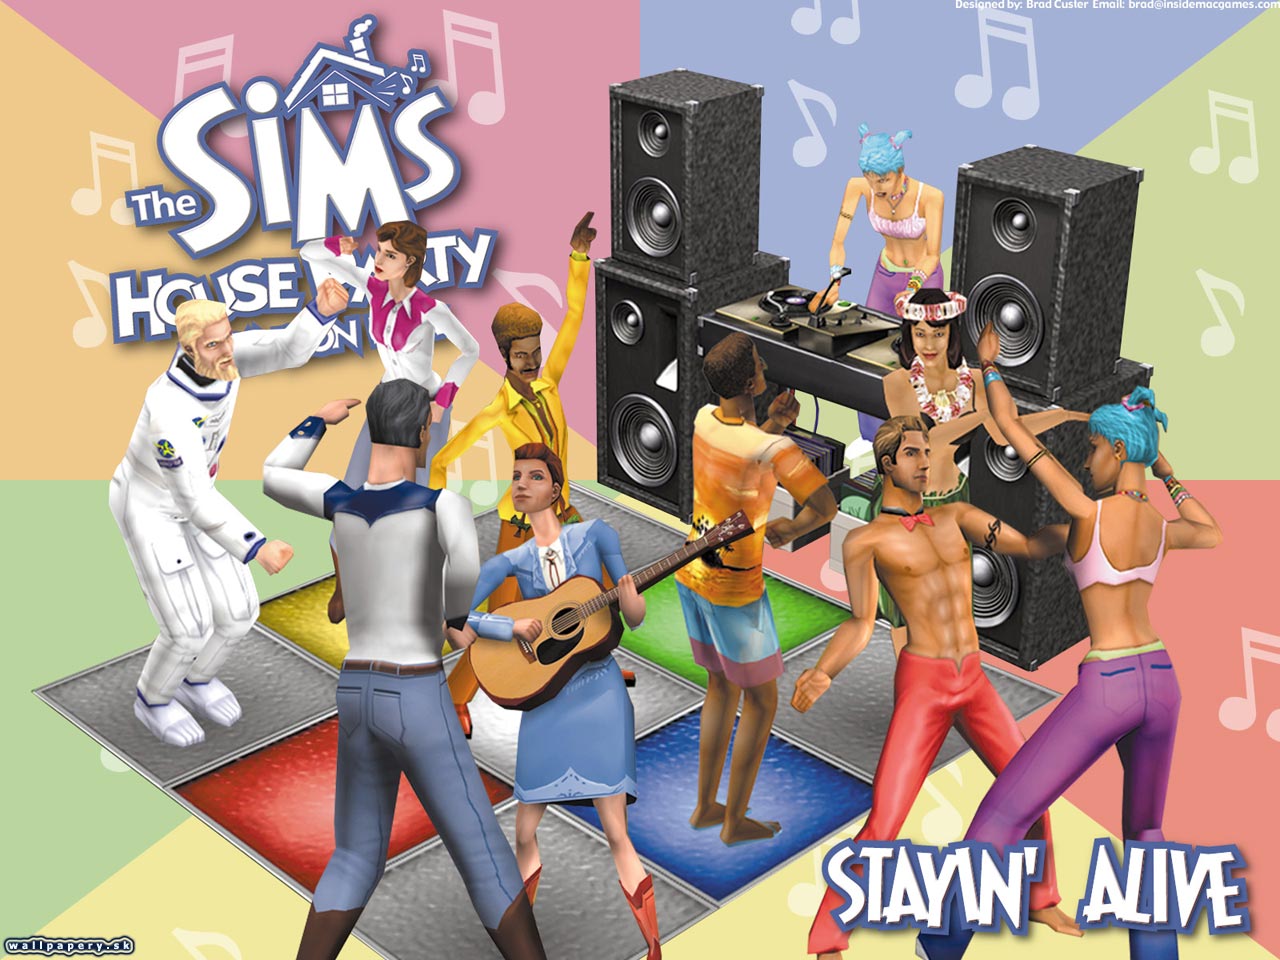 The Sims: House Party - wallpaper 4